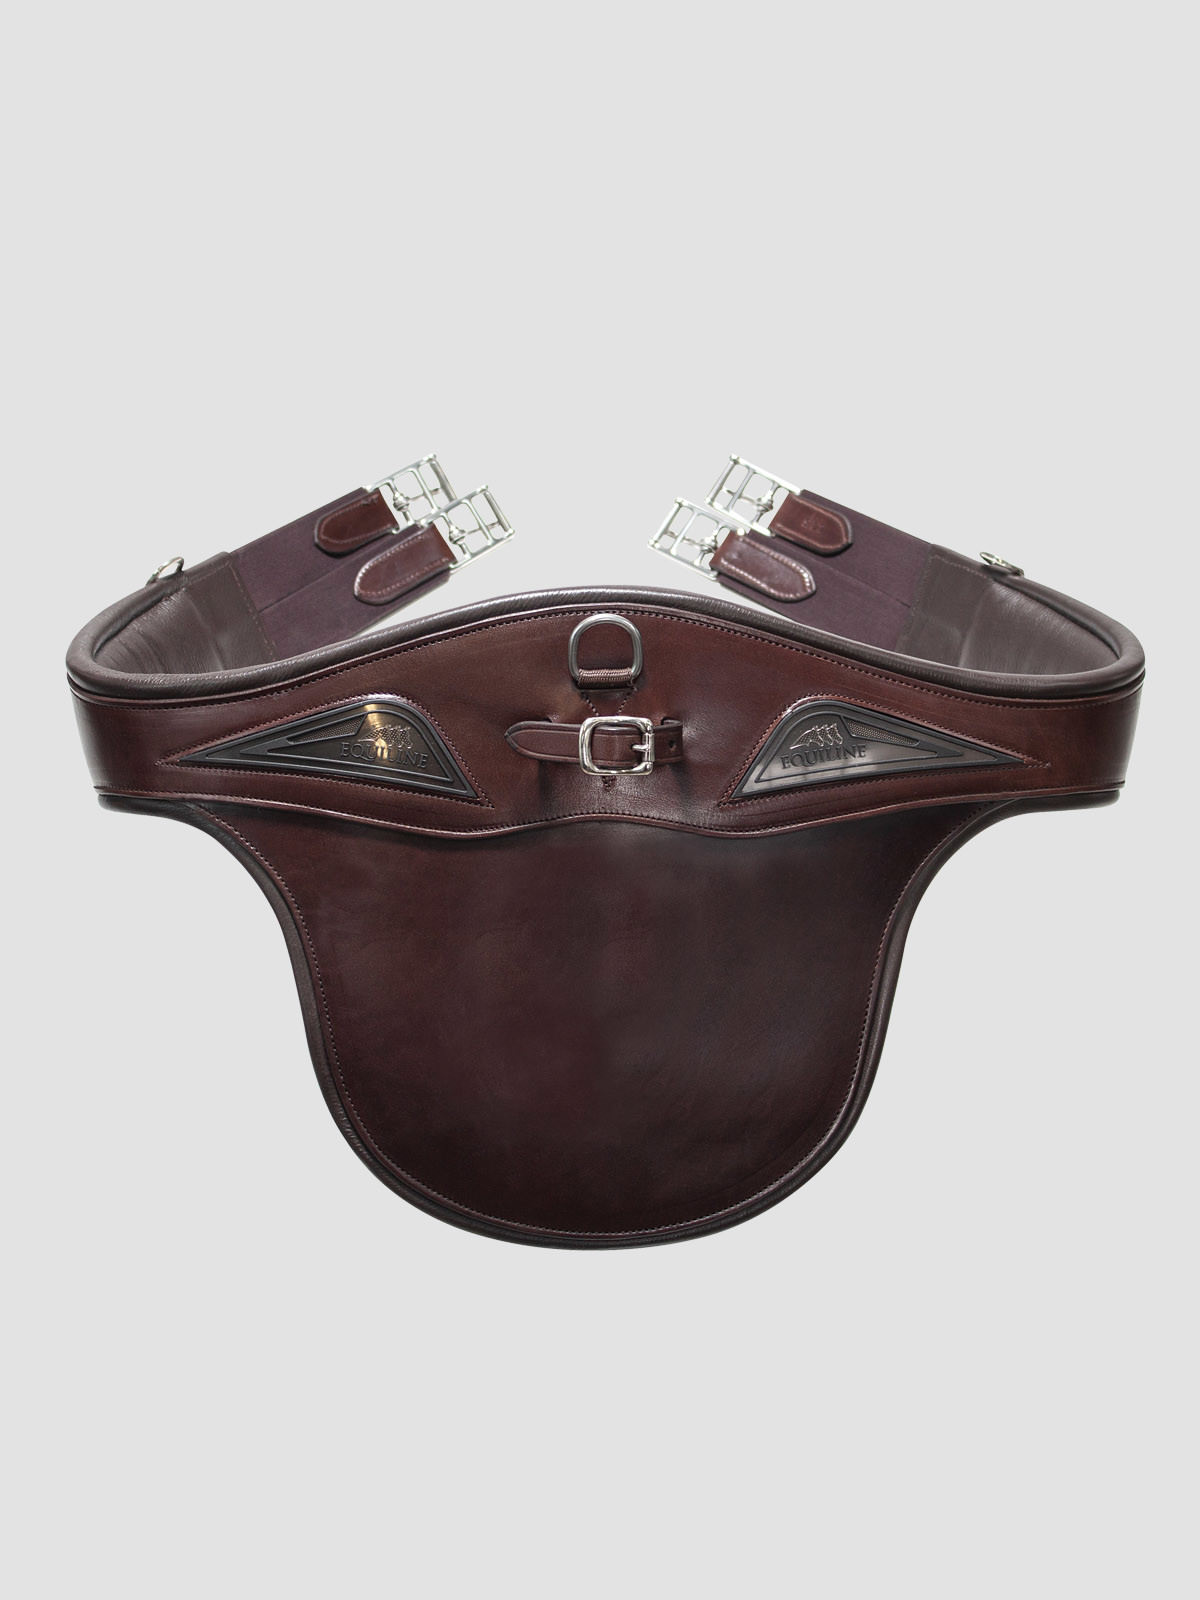 Equiline Belly guard girth